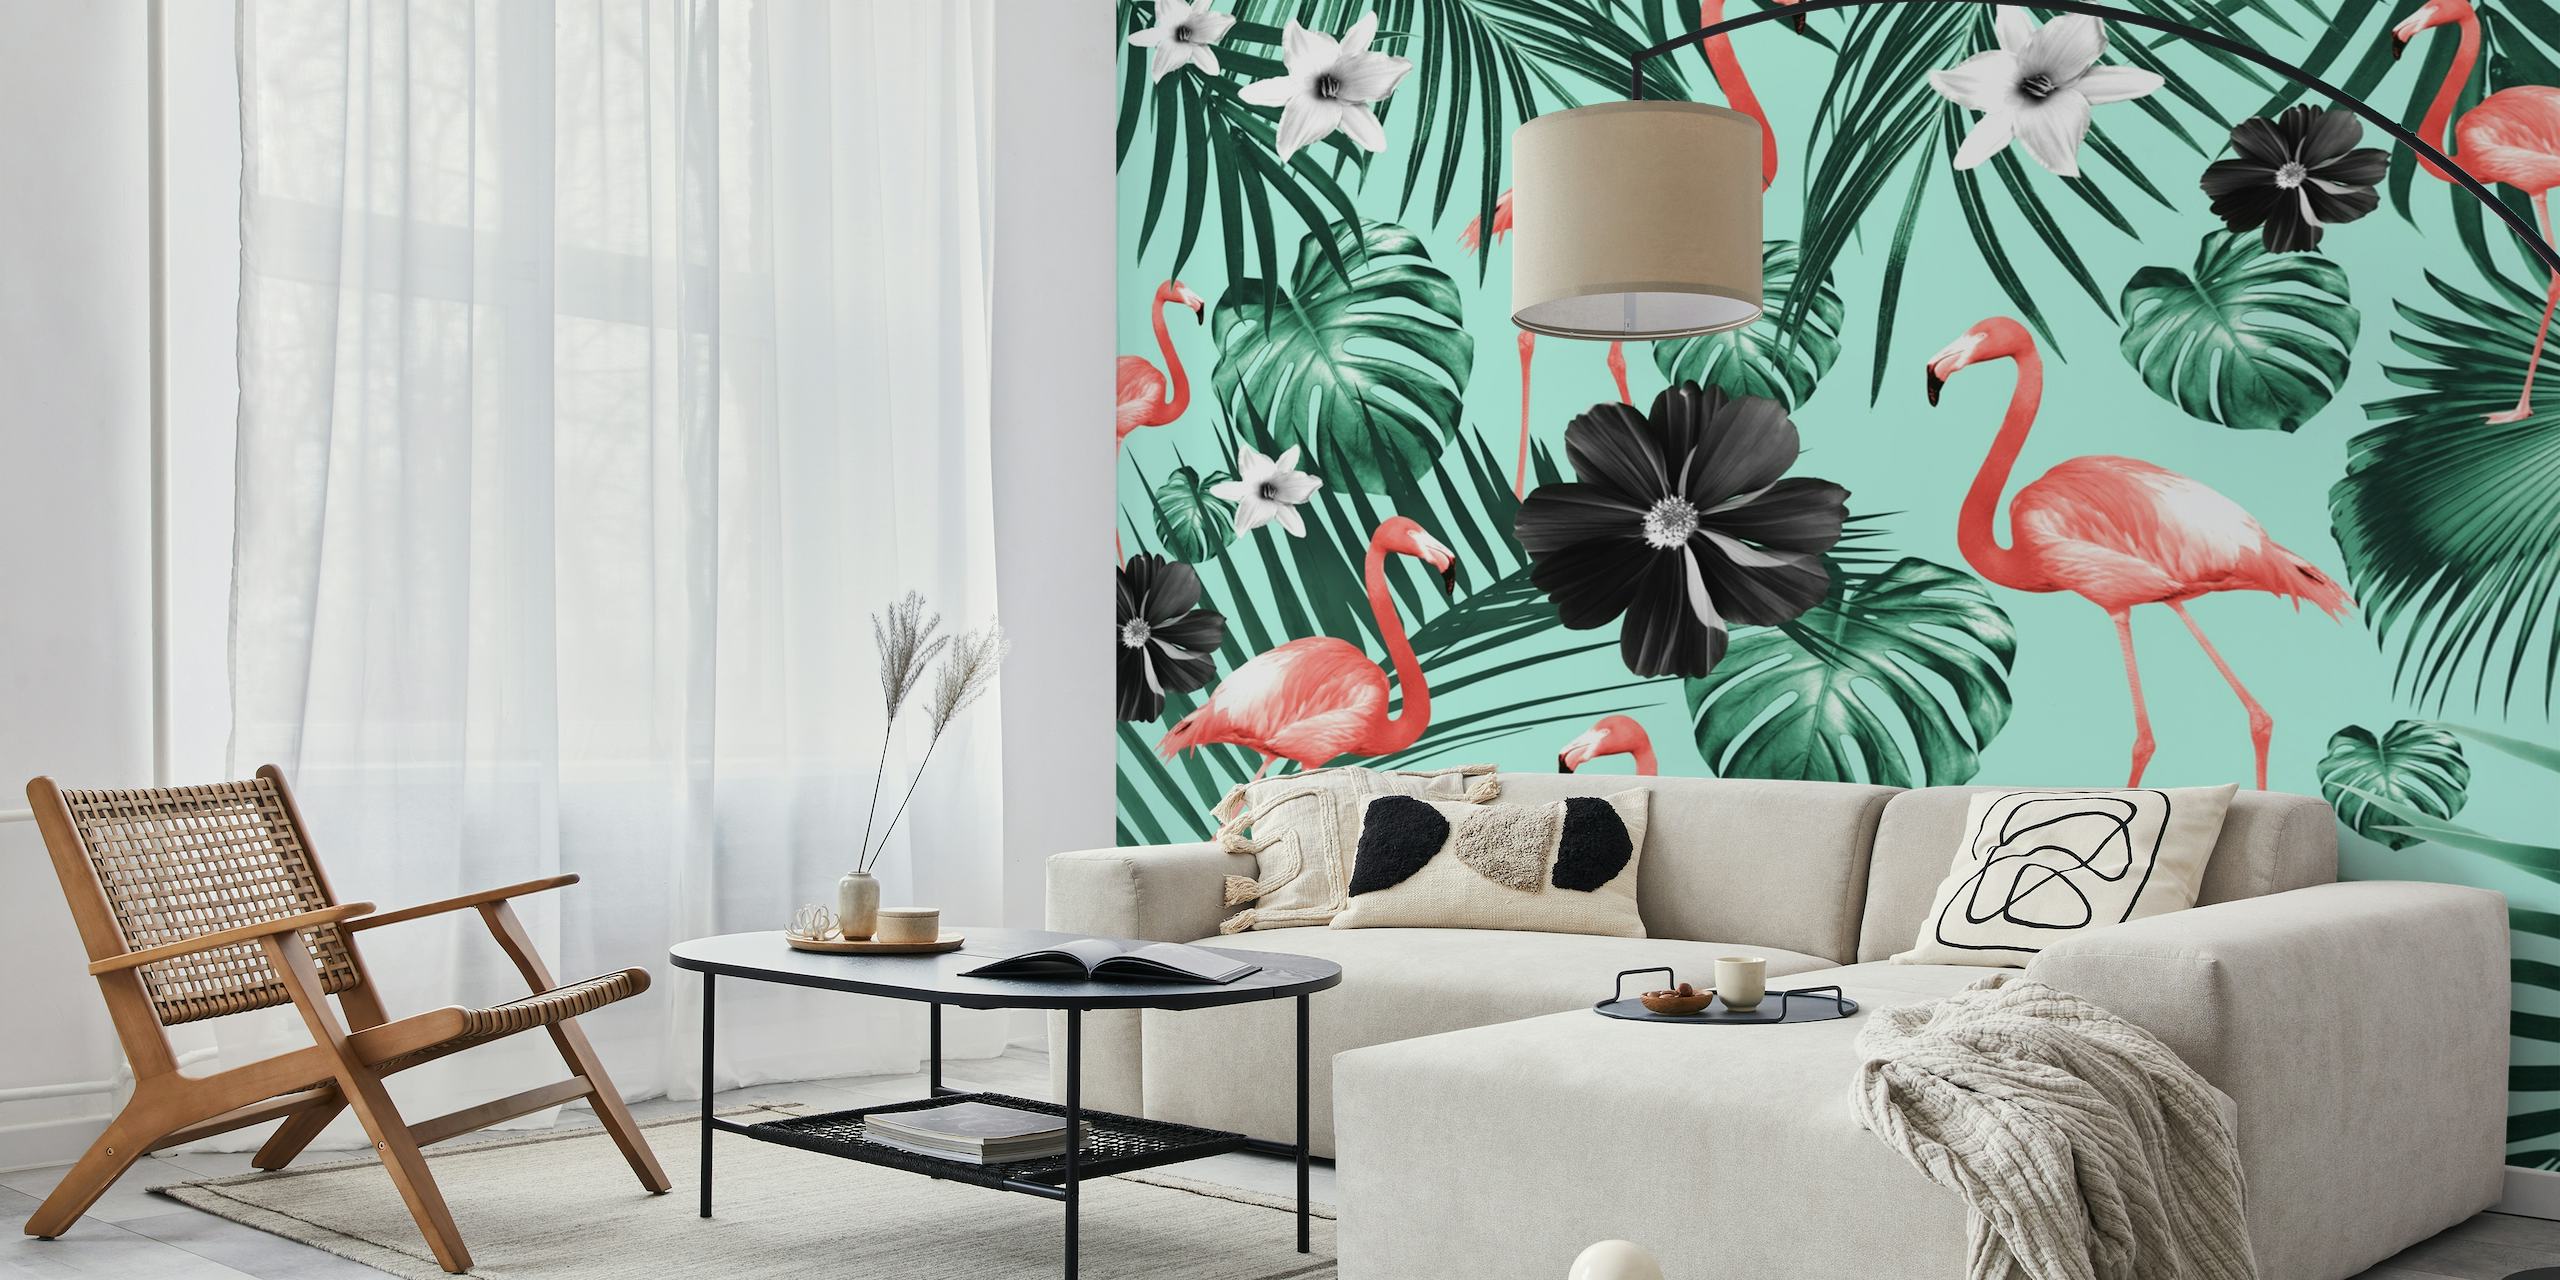 Tropical Flamingo Flower 3 wall mural with pink flamingos and green foliage